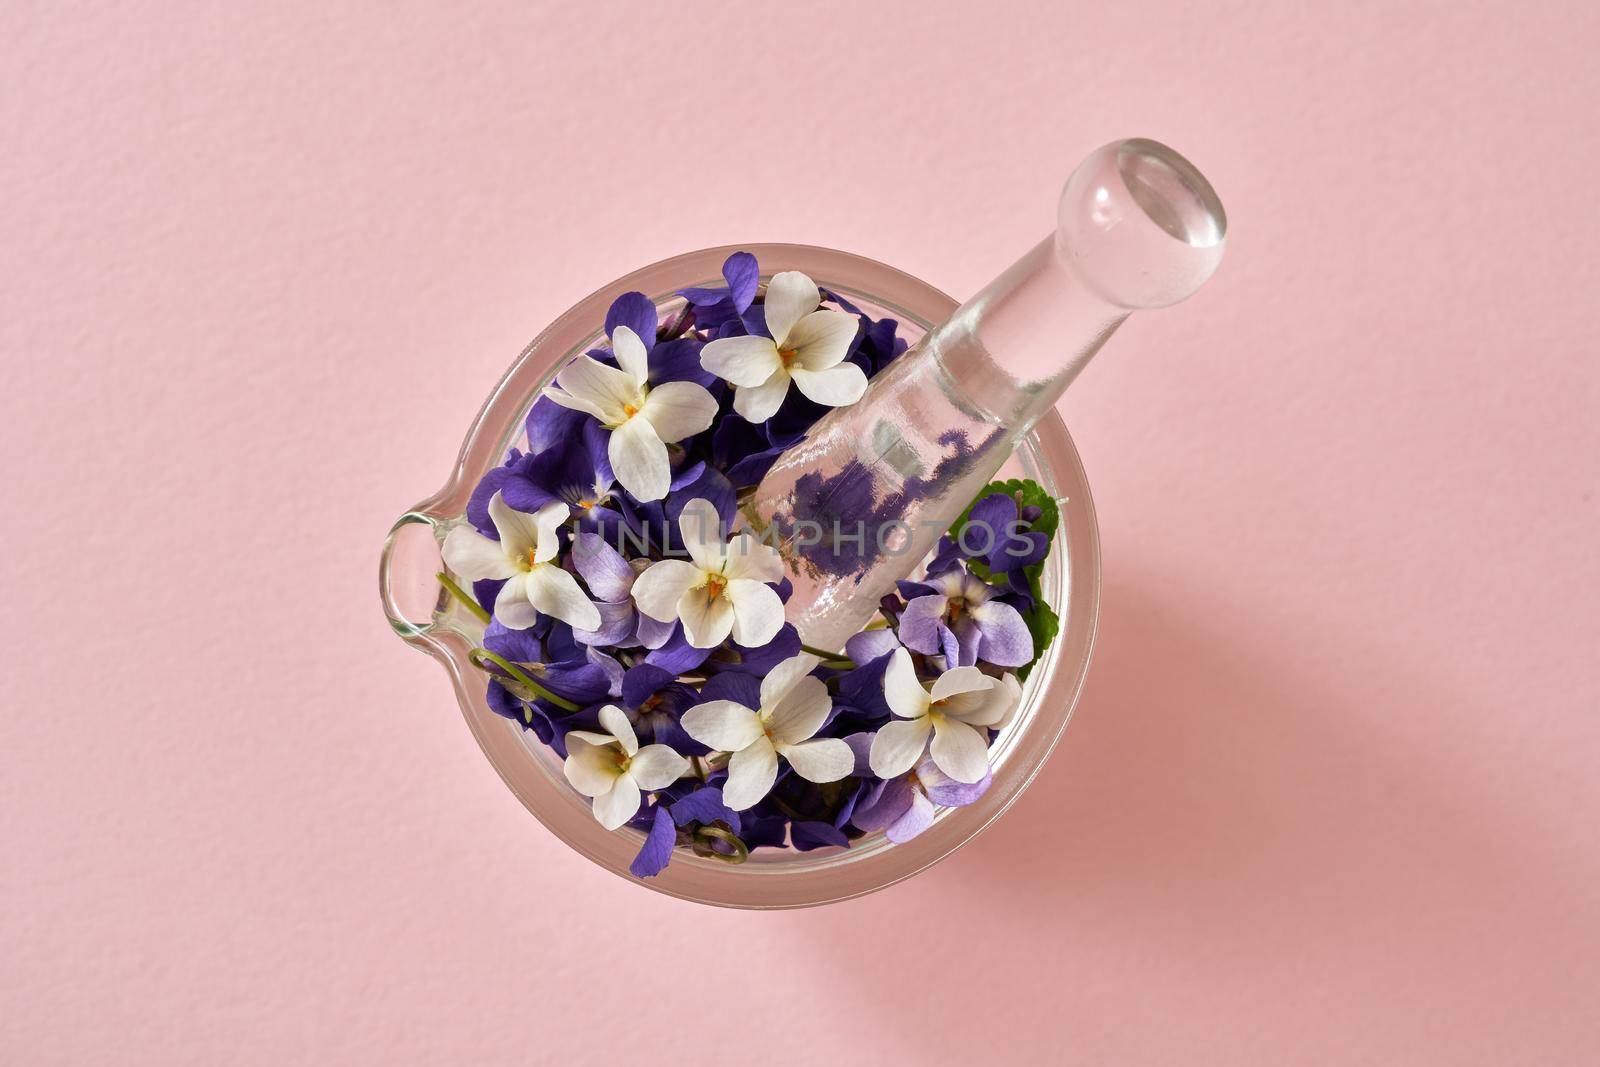 Spring concept - white and purple English violet flowers in a glass mortar on a pastel pink background, by madeleine_steinbach